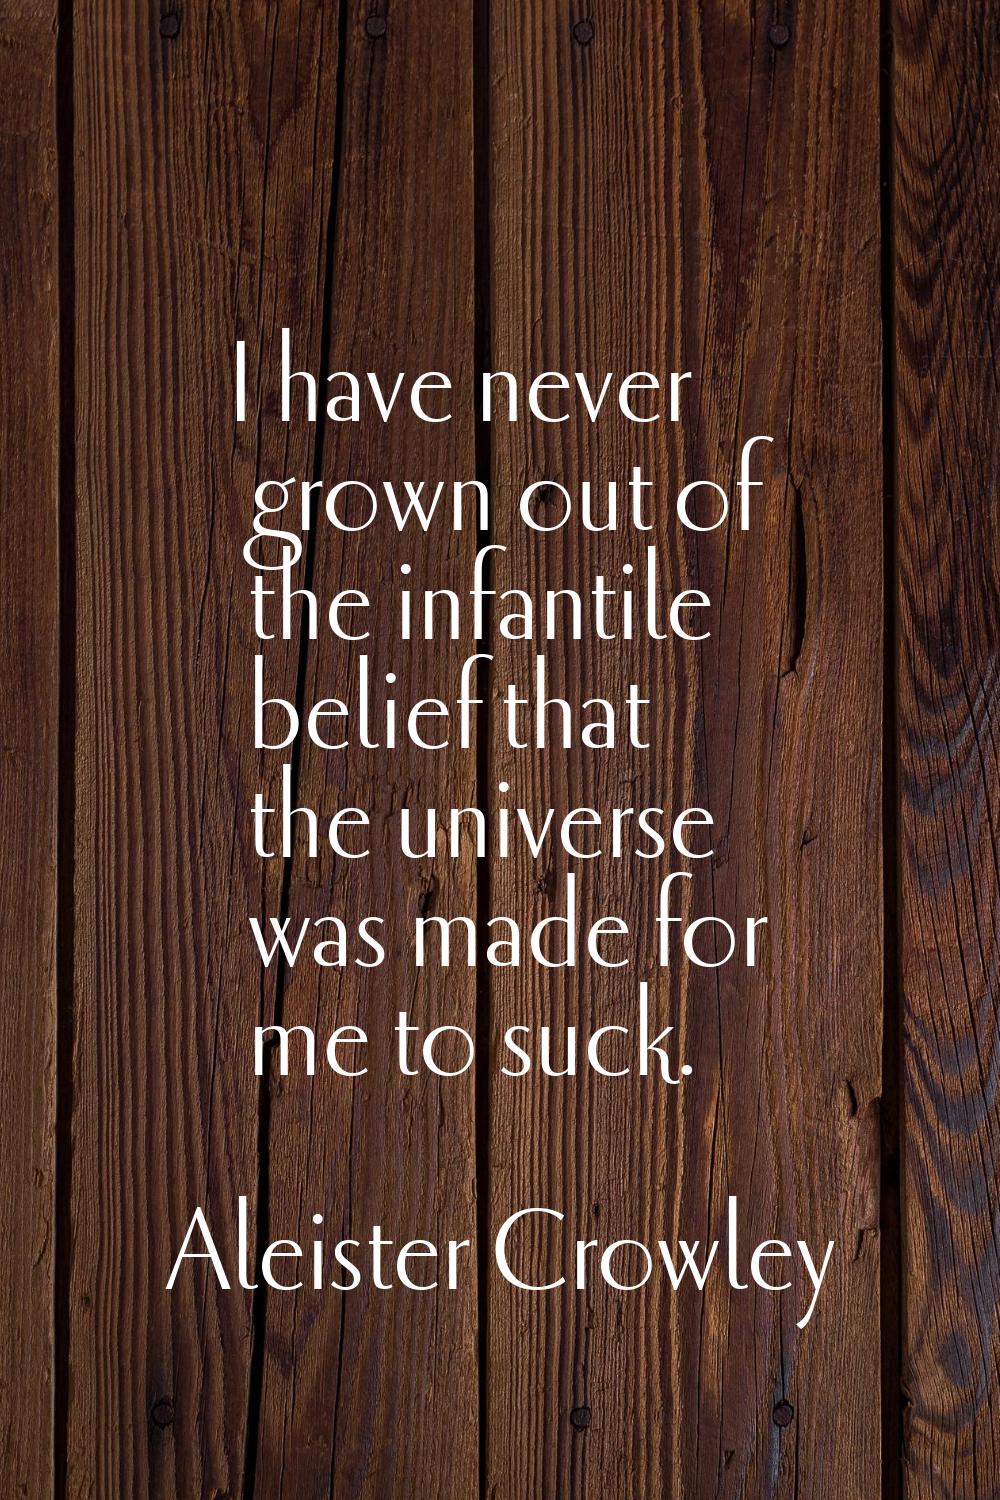 I have never grown out of the infantile belief that the universe was made for me to suck.